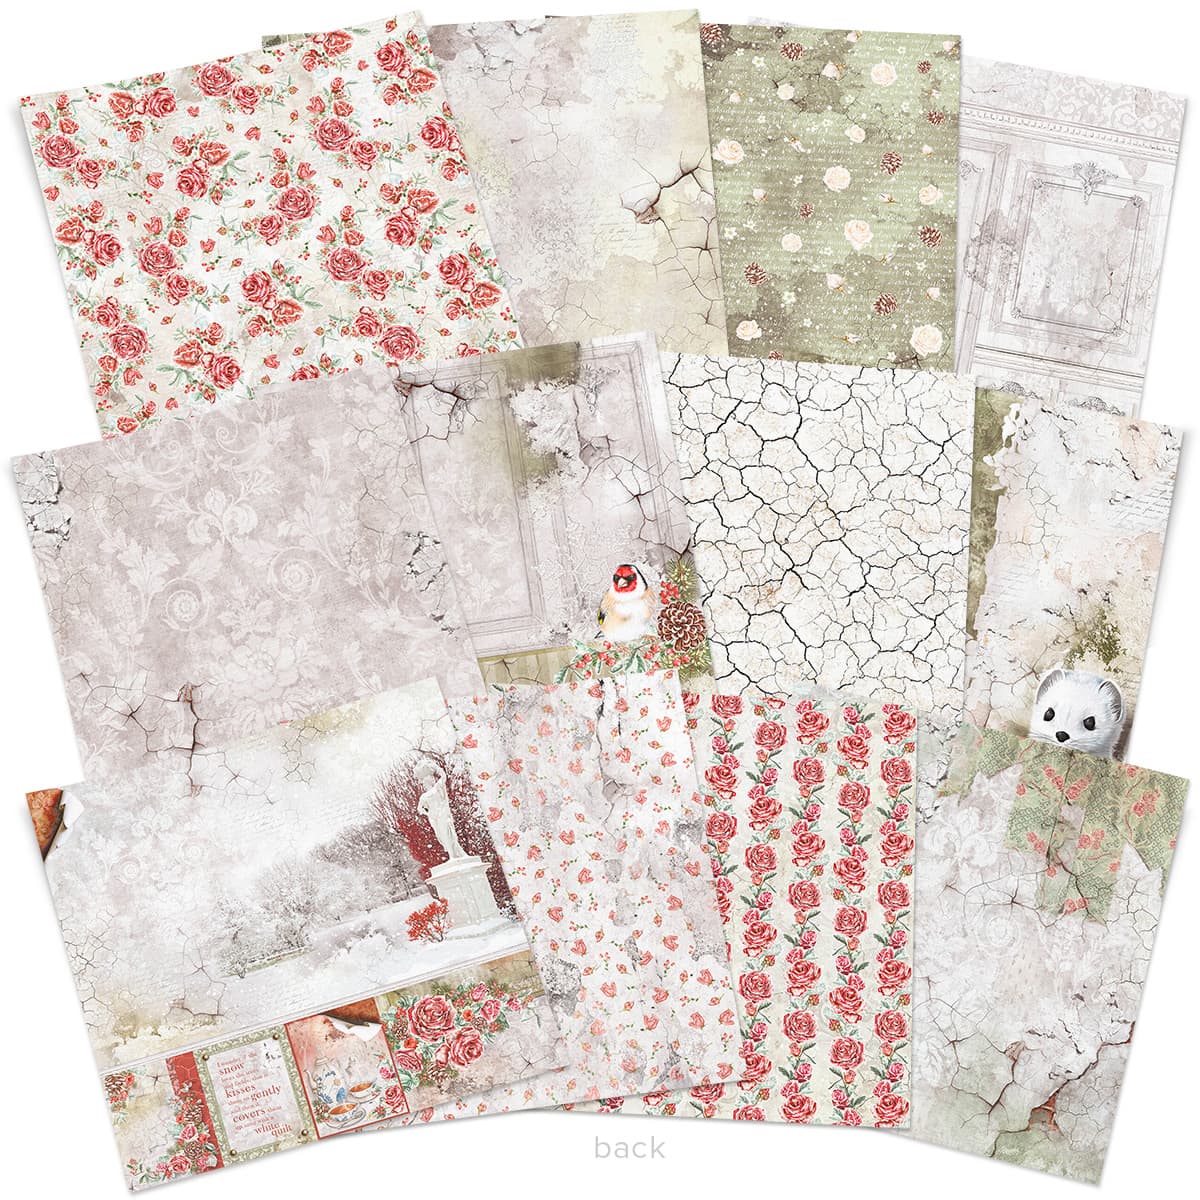 Stamperia Romantic Sea Dream Collection 12 X 12 Scrapbooking Double Sided  Paper Scrapbooking Pad 10 Sheets Scrapbook Paper -  Finland